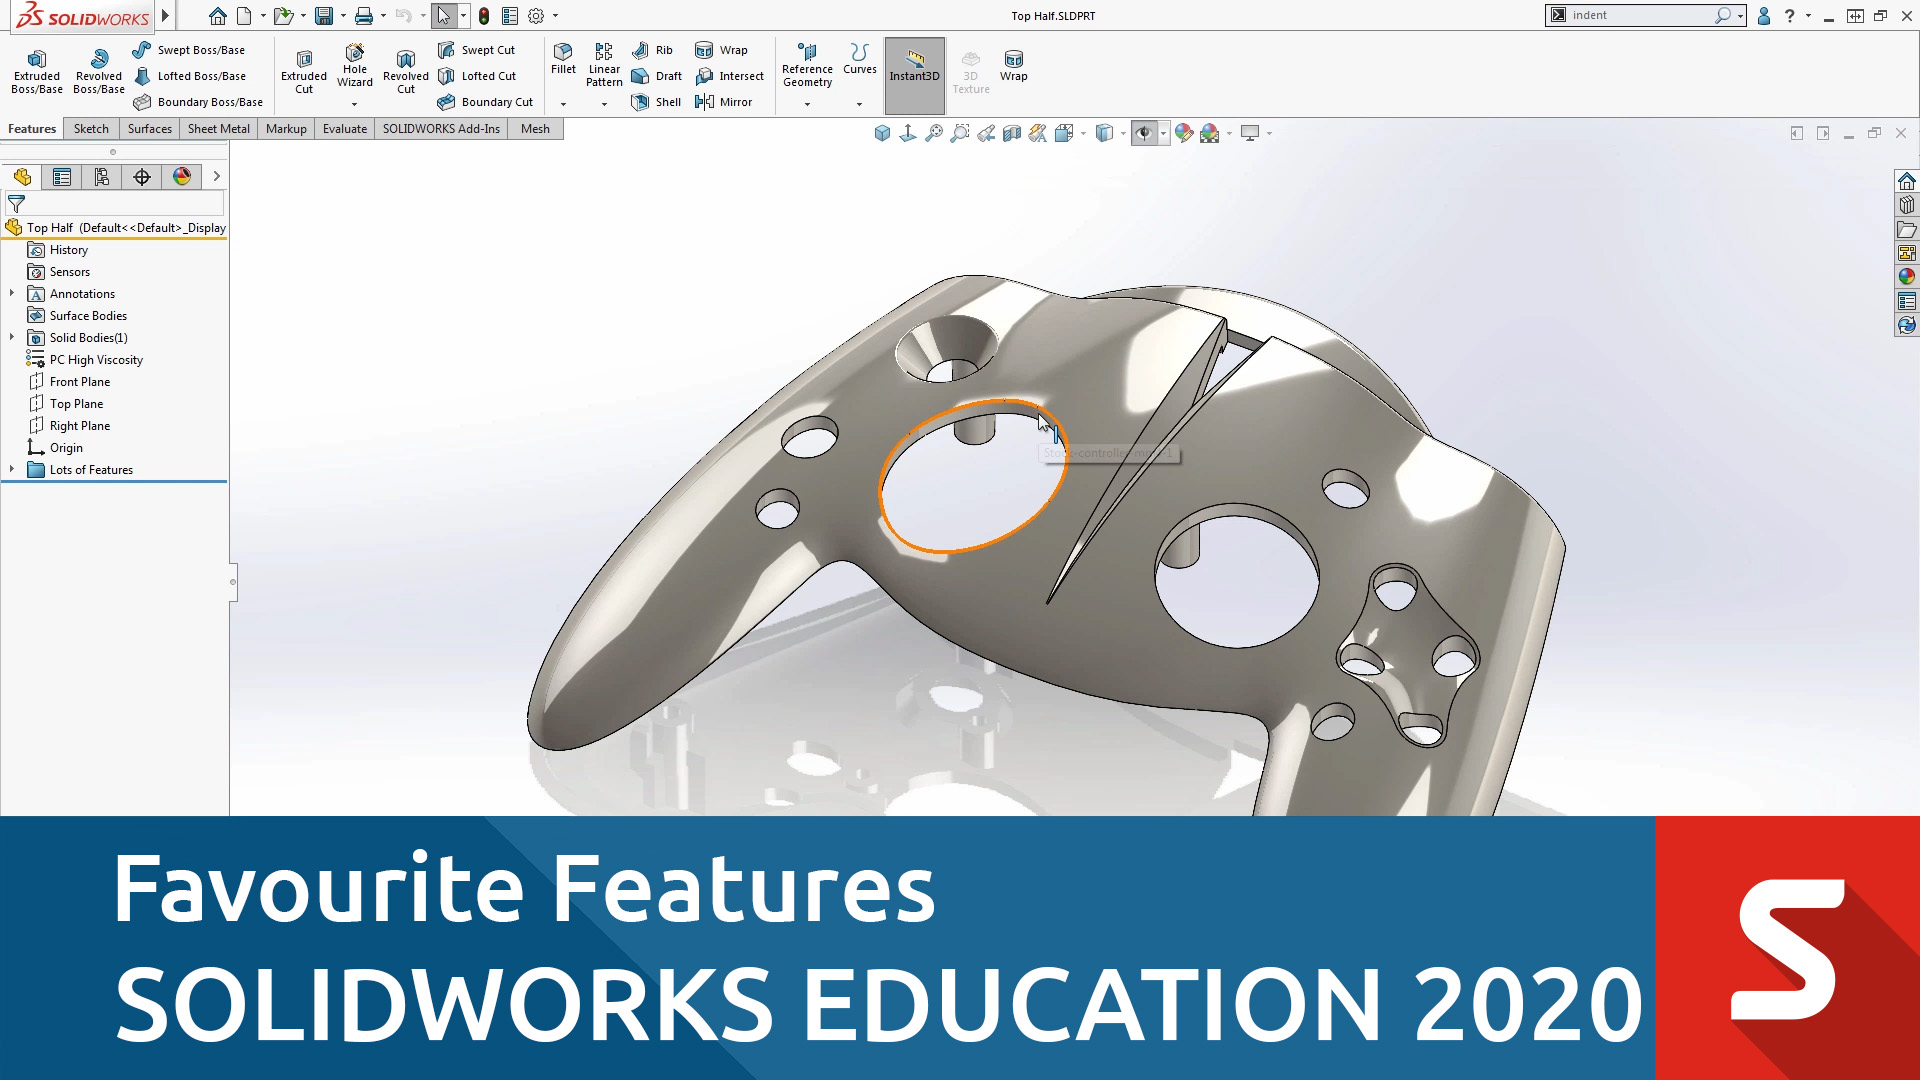 solidworks education download instructions